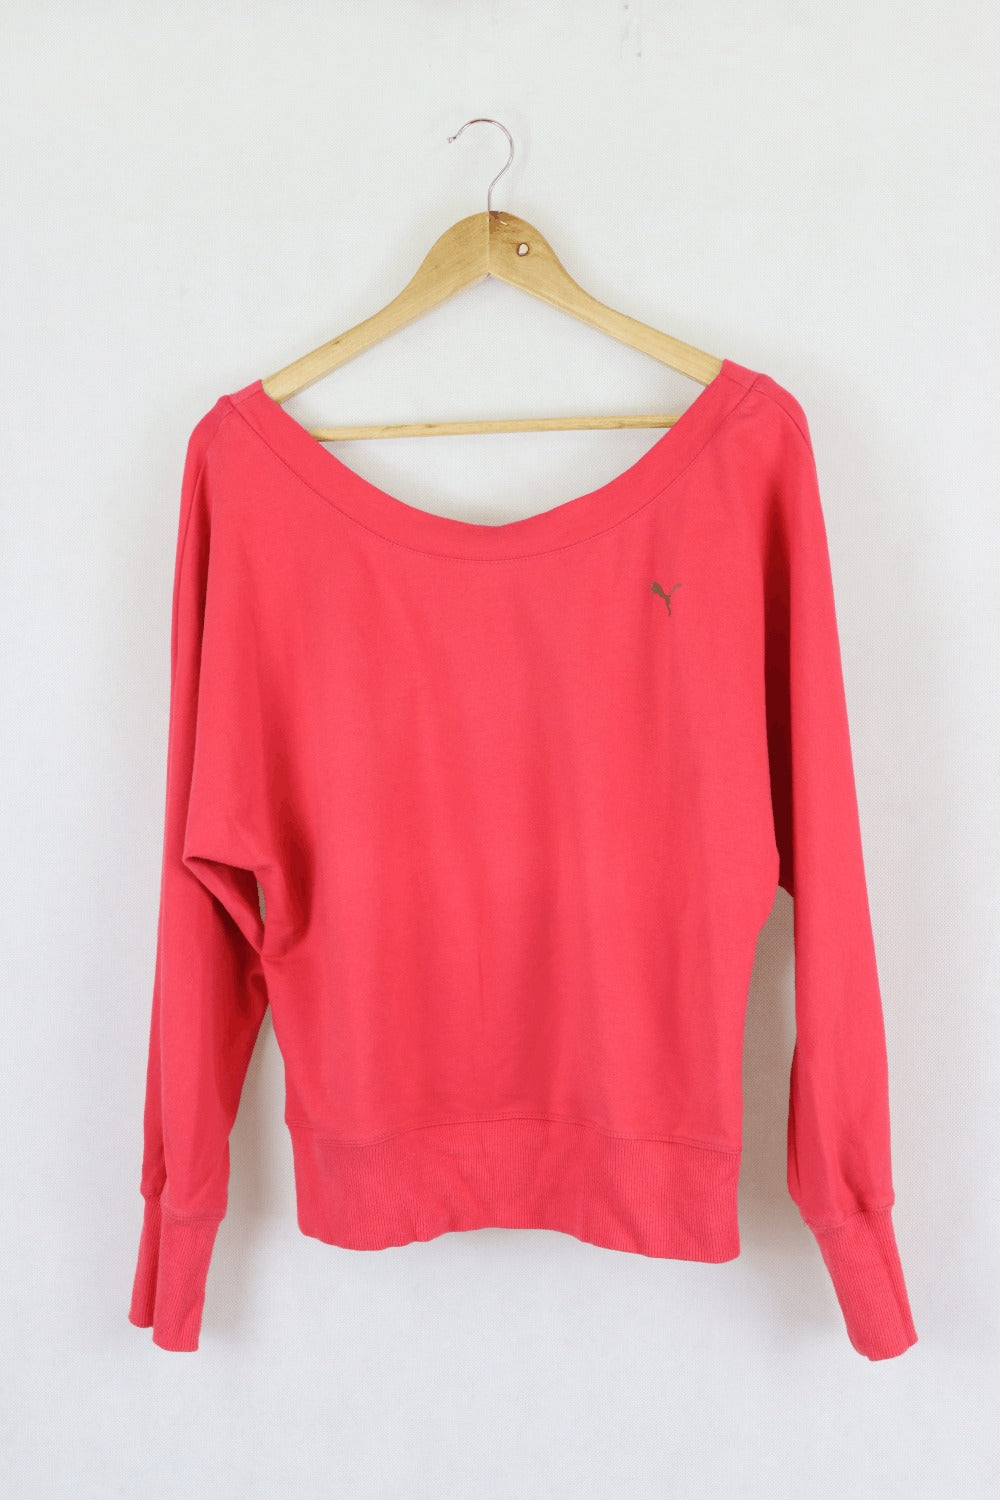 Puma Pink Top With Lace Up Detail L